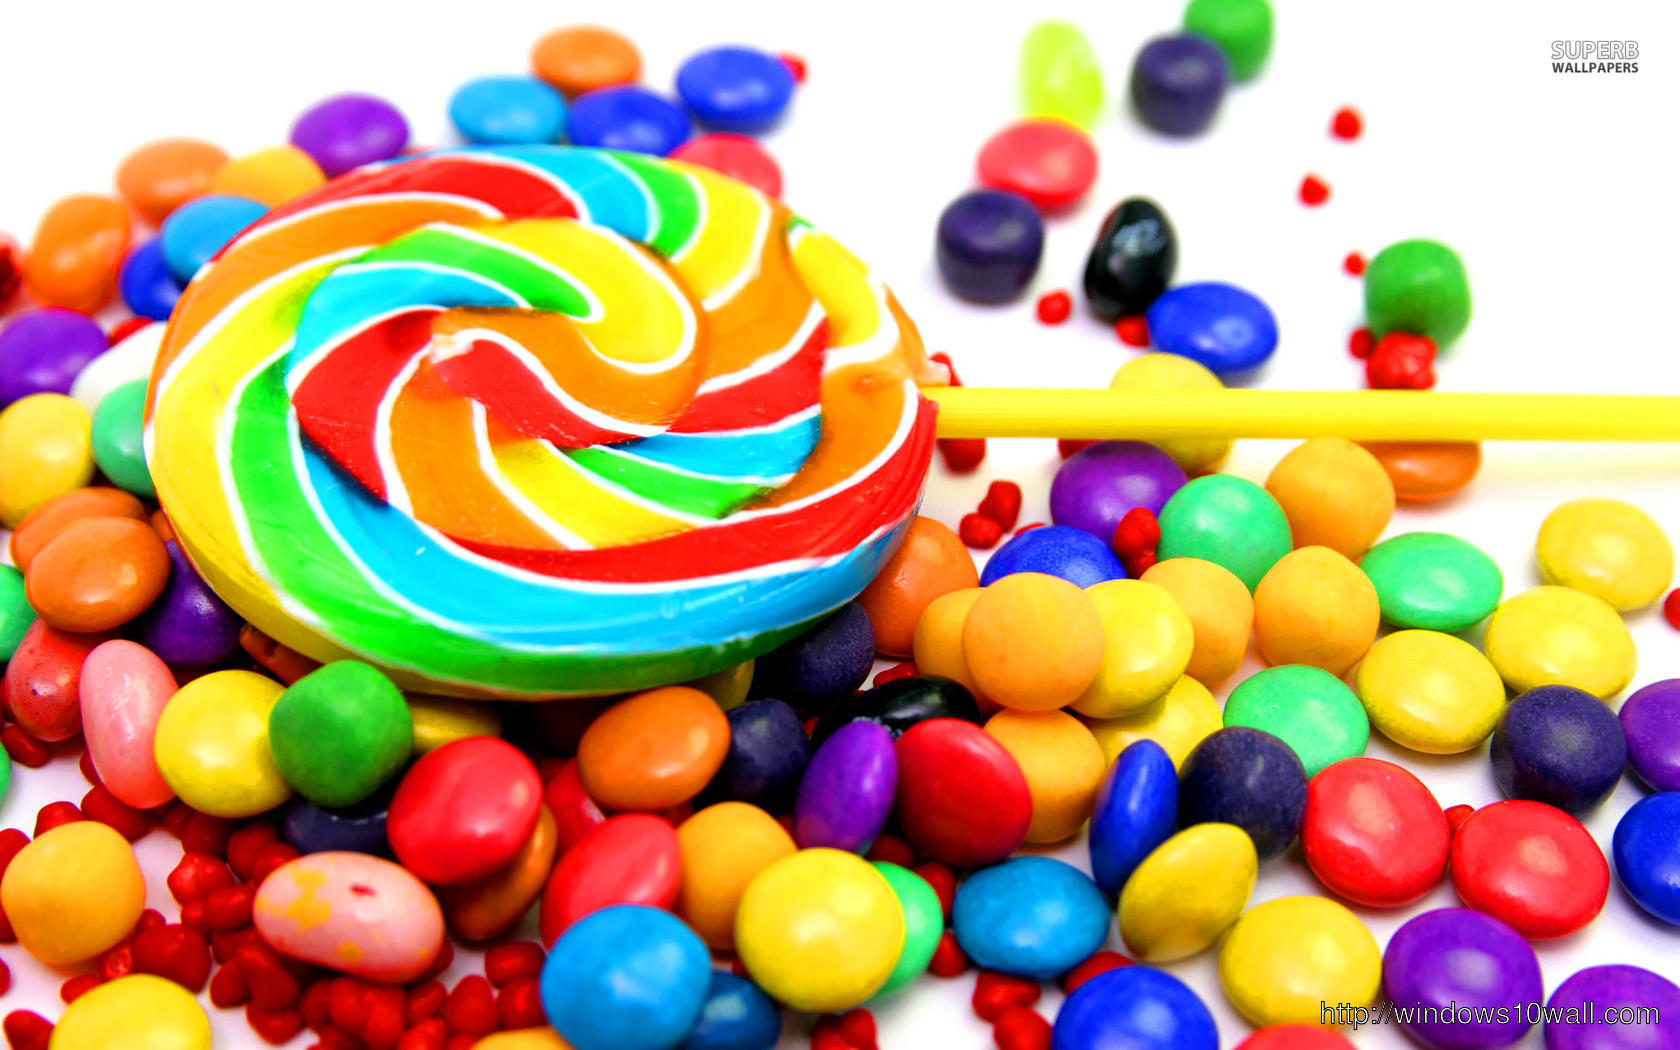 Colorful Candy Background Wallpaper